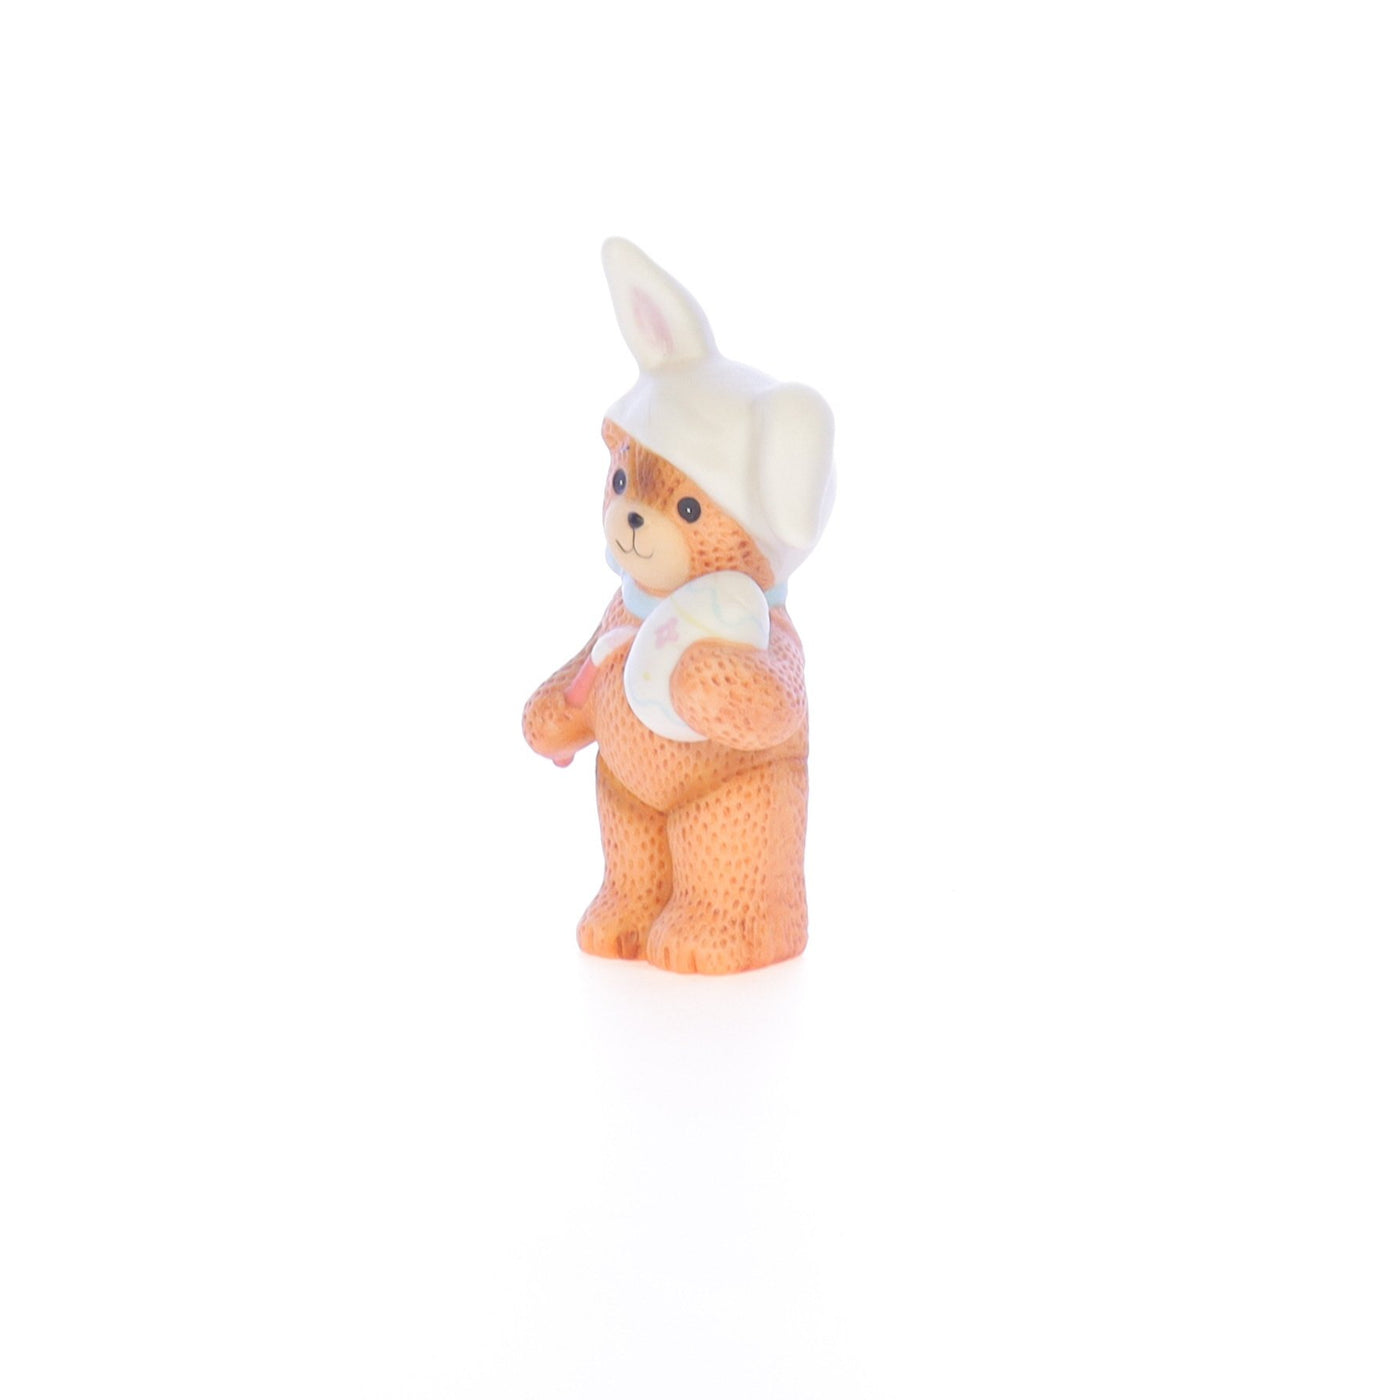 Lucy_And_Me_by_Lucy_Atwell_Porcelain_Figurine_Bunny_Bear_Painting_Easter_Egg_Lucy_Unknown_055_02